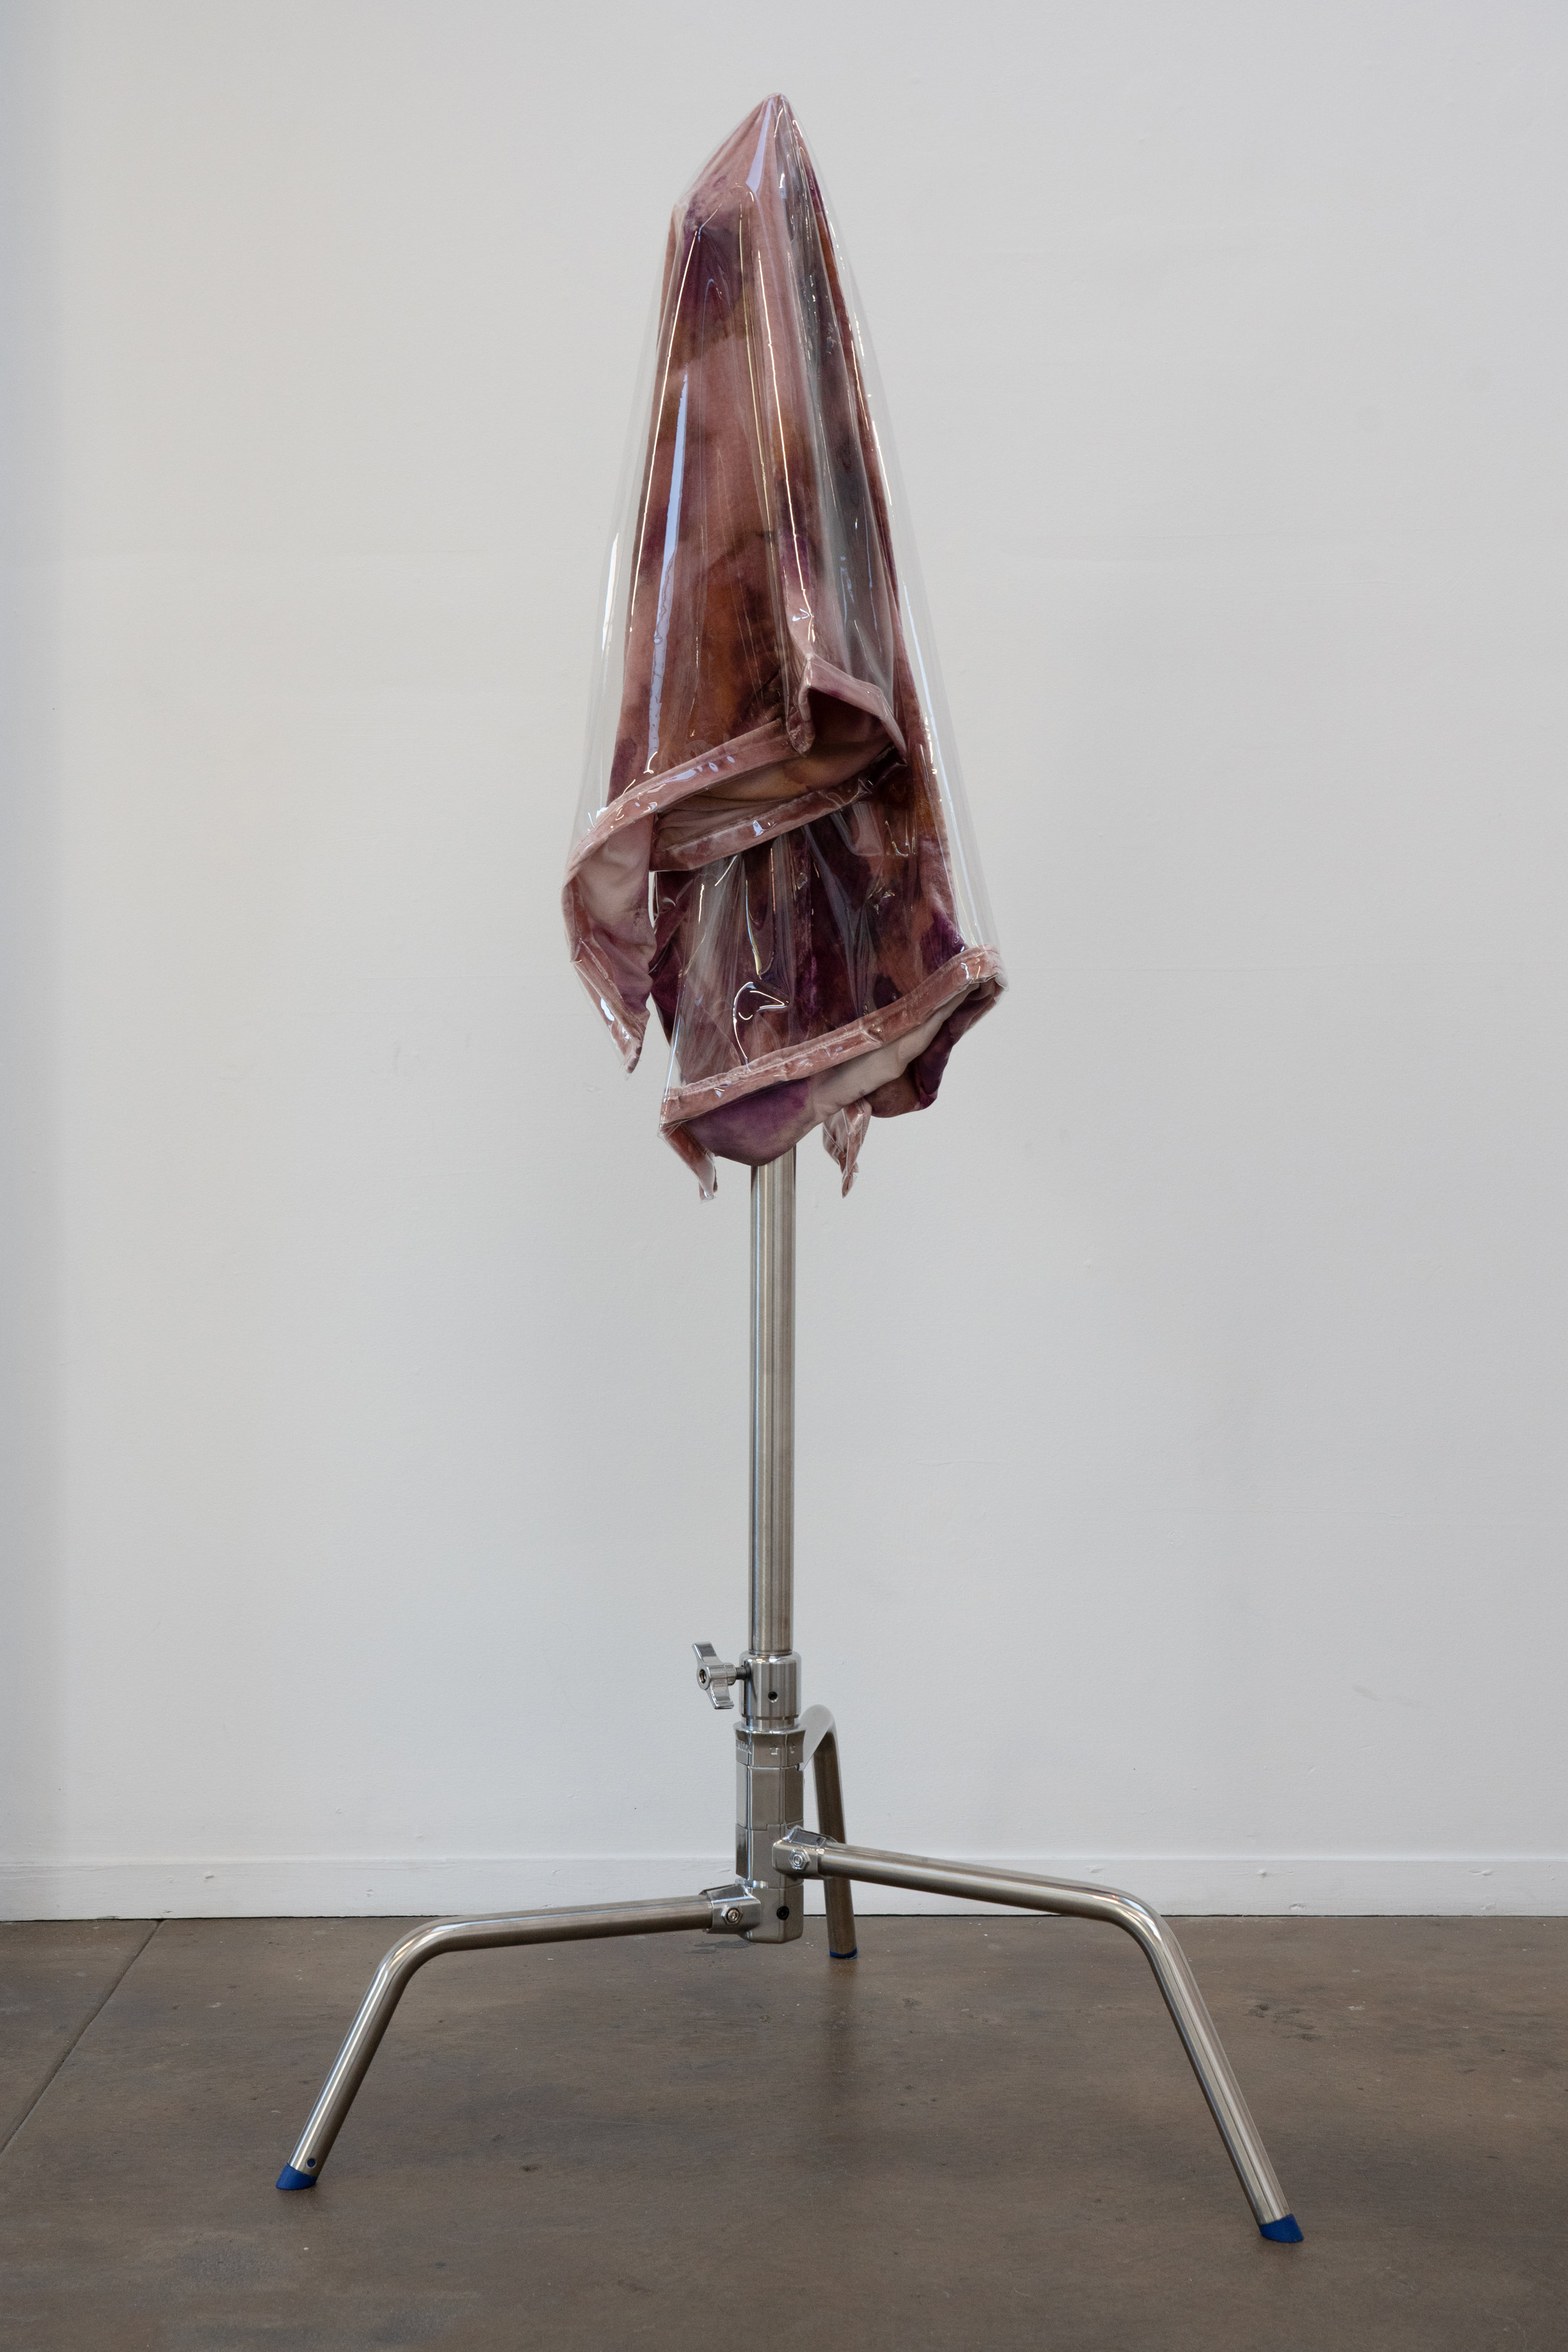  Quay Quinn Wolf,  “I adored that velvet dress”,  2019. Pink silk-velvet stained with African red roses and Shea oil, PVC sheet, chrome C-stand. 